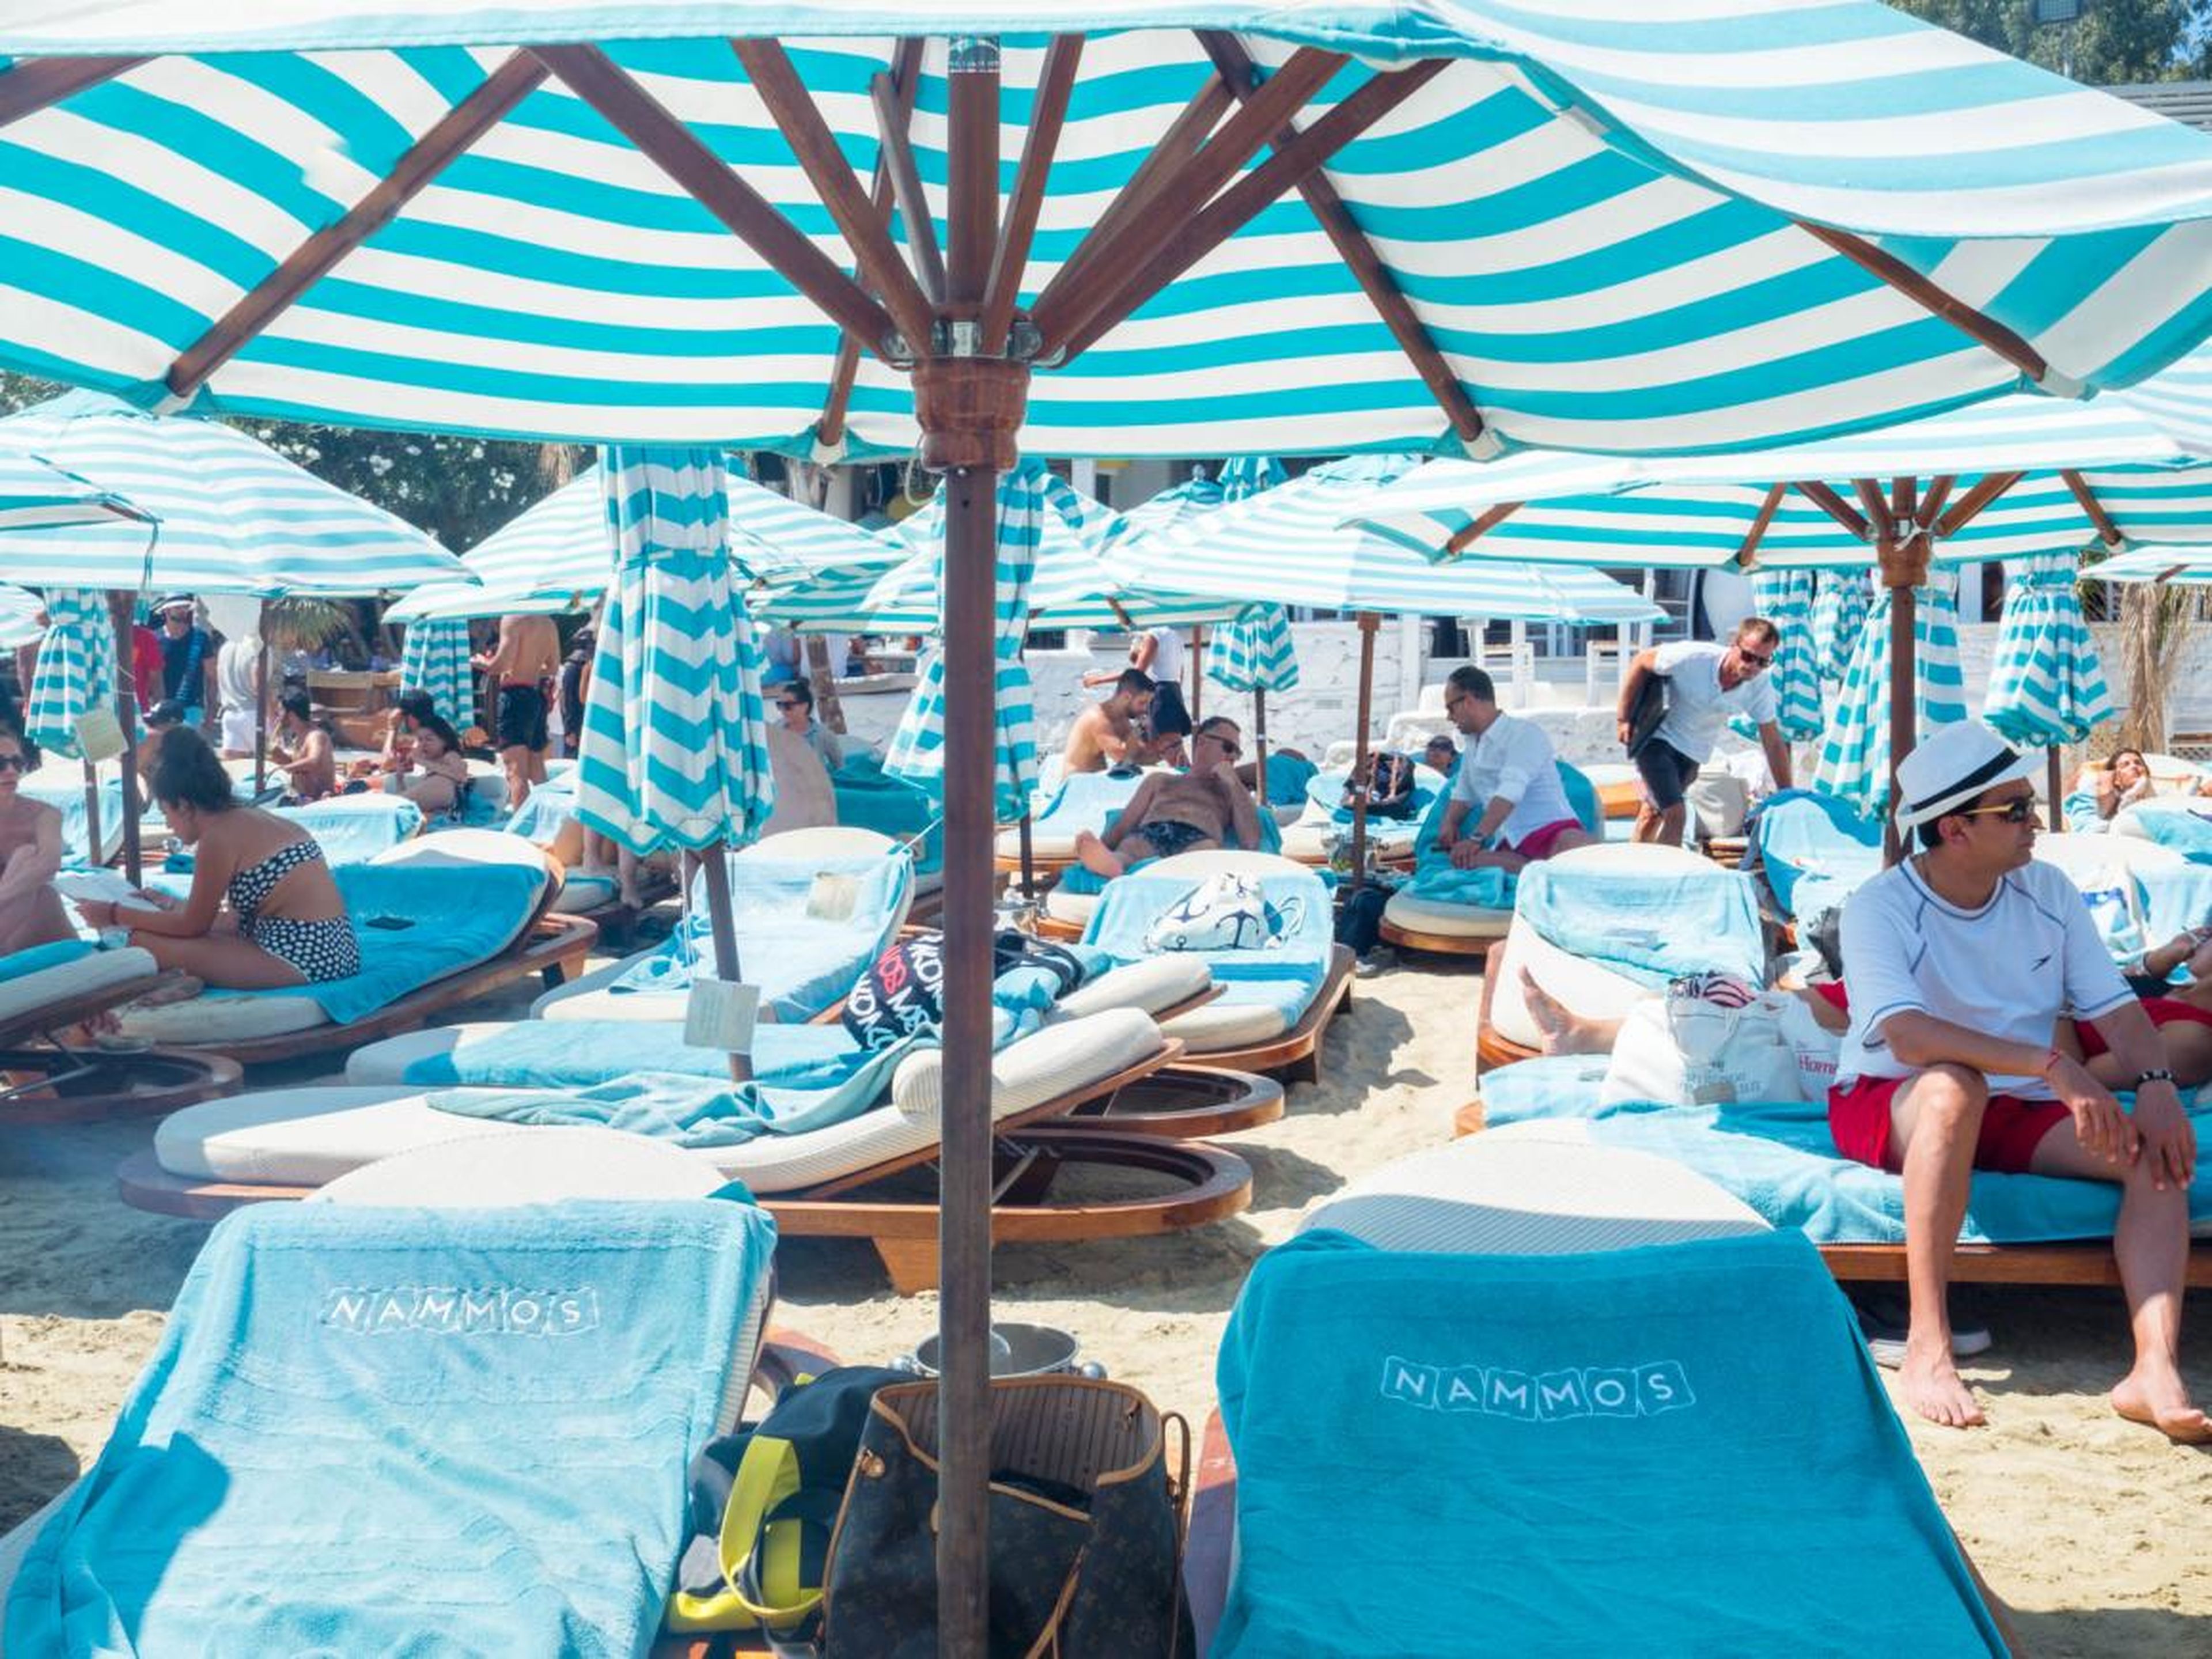 For those looking for a day party, Mykonos is the king of the chummy beach club party. So long as you can pay. Nammos is one of the hottest spots, with loungers practically stacked on top of each other and champagne-doused lunches